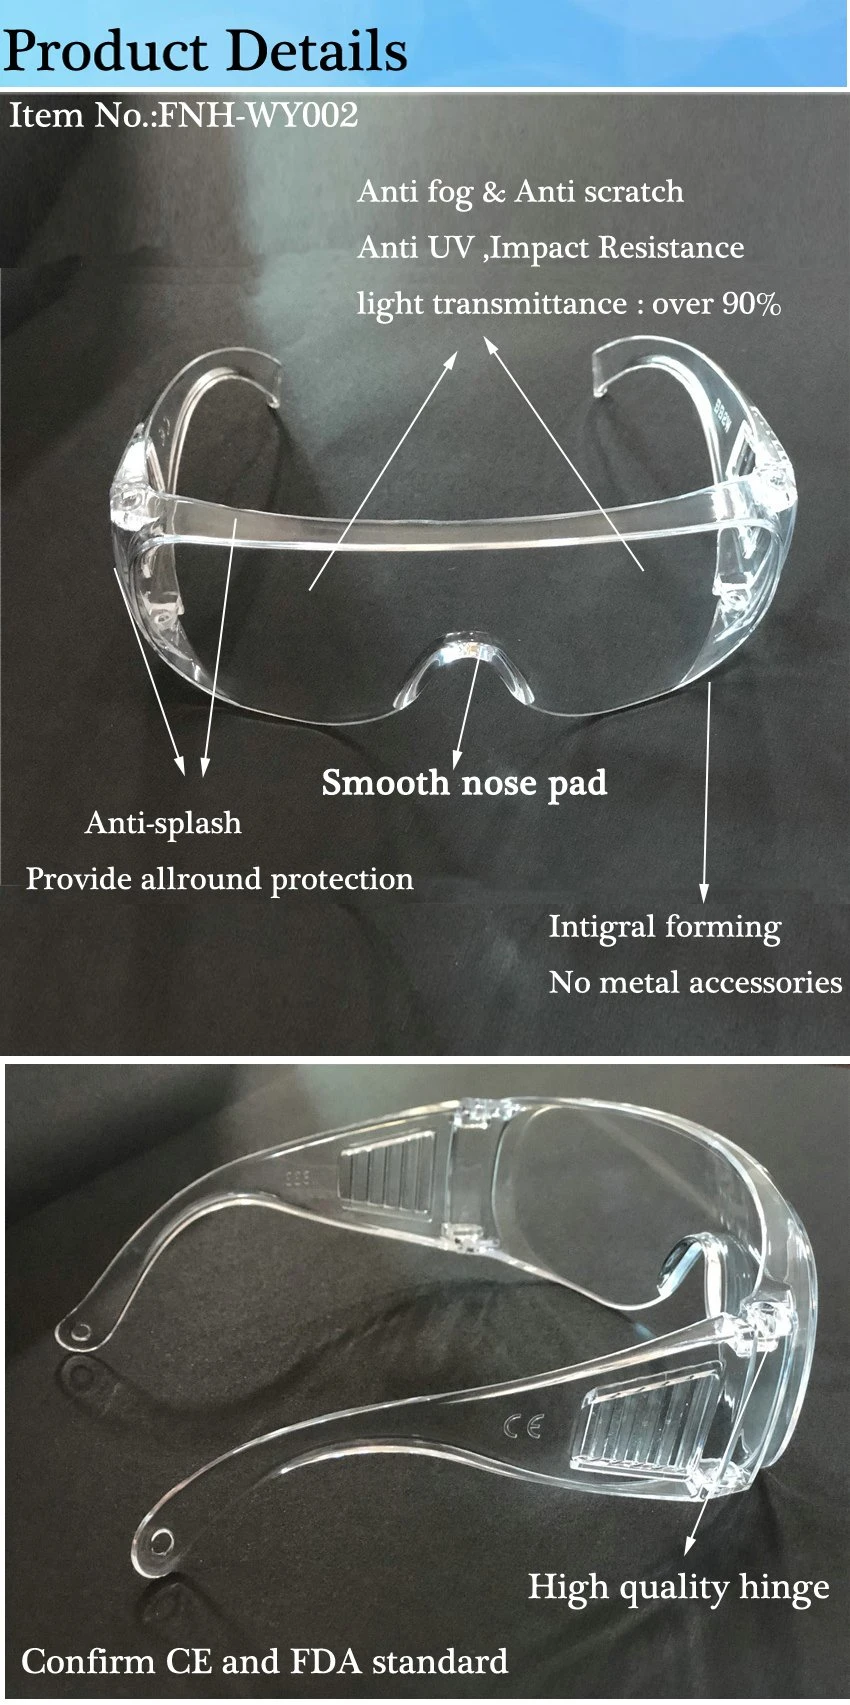 Anti Impact Fog Proof PPE Scratch Resistant Eyewear Eye Protective Safety Glasses